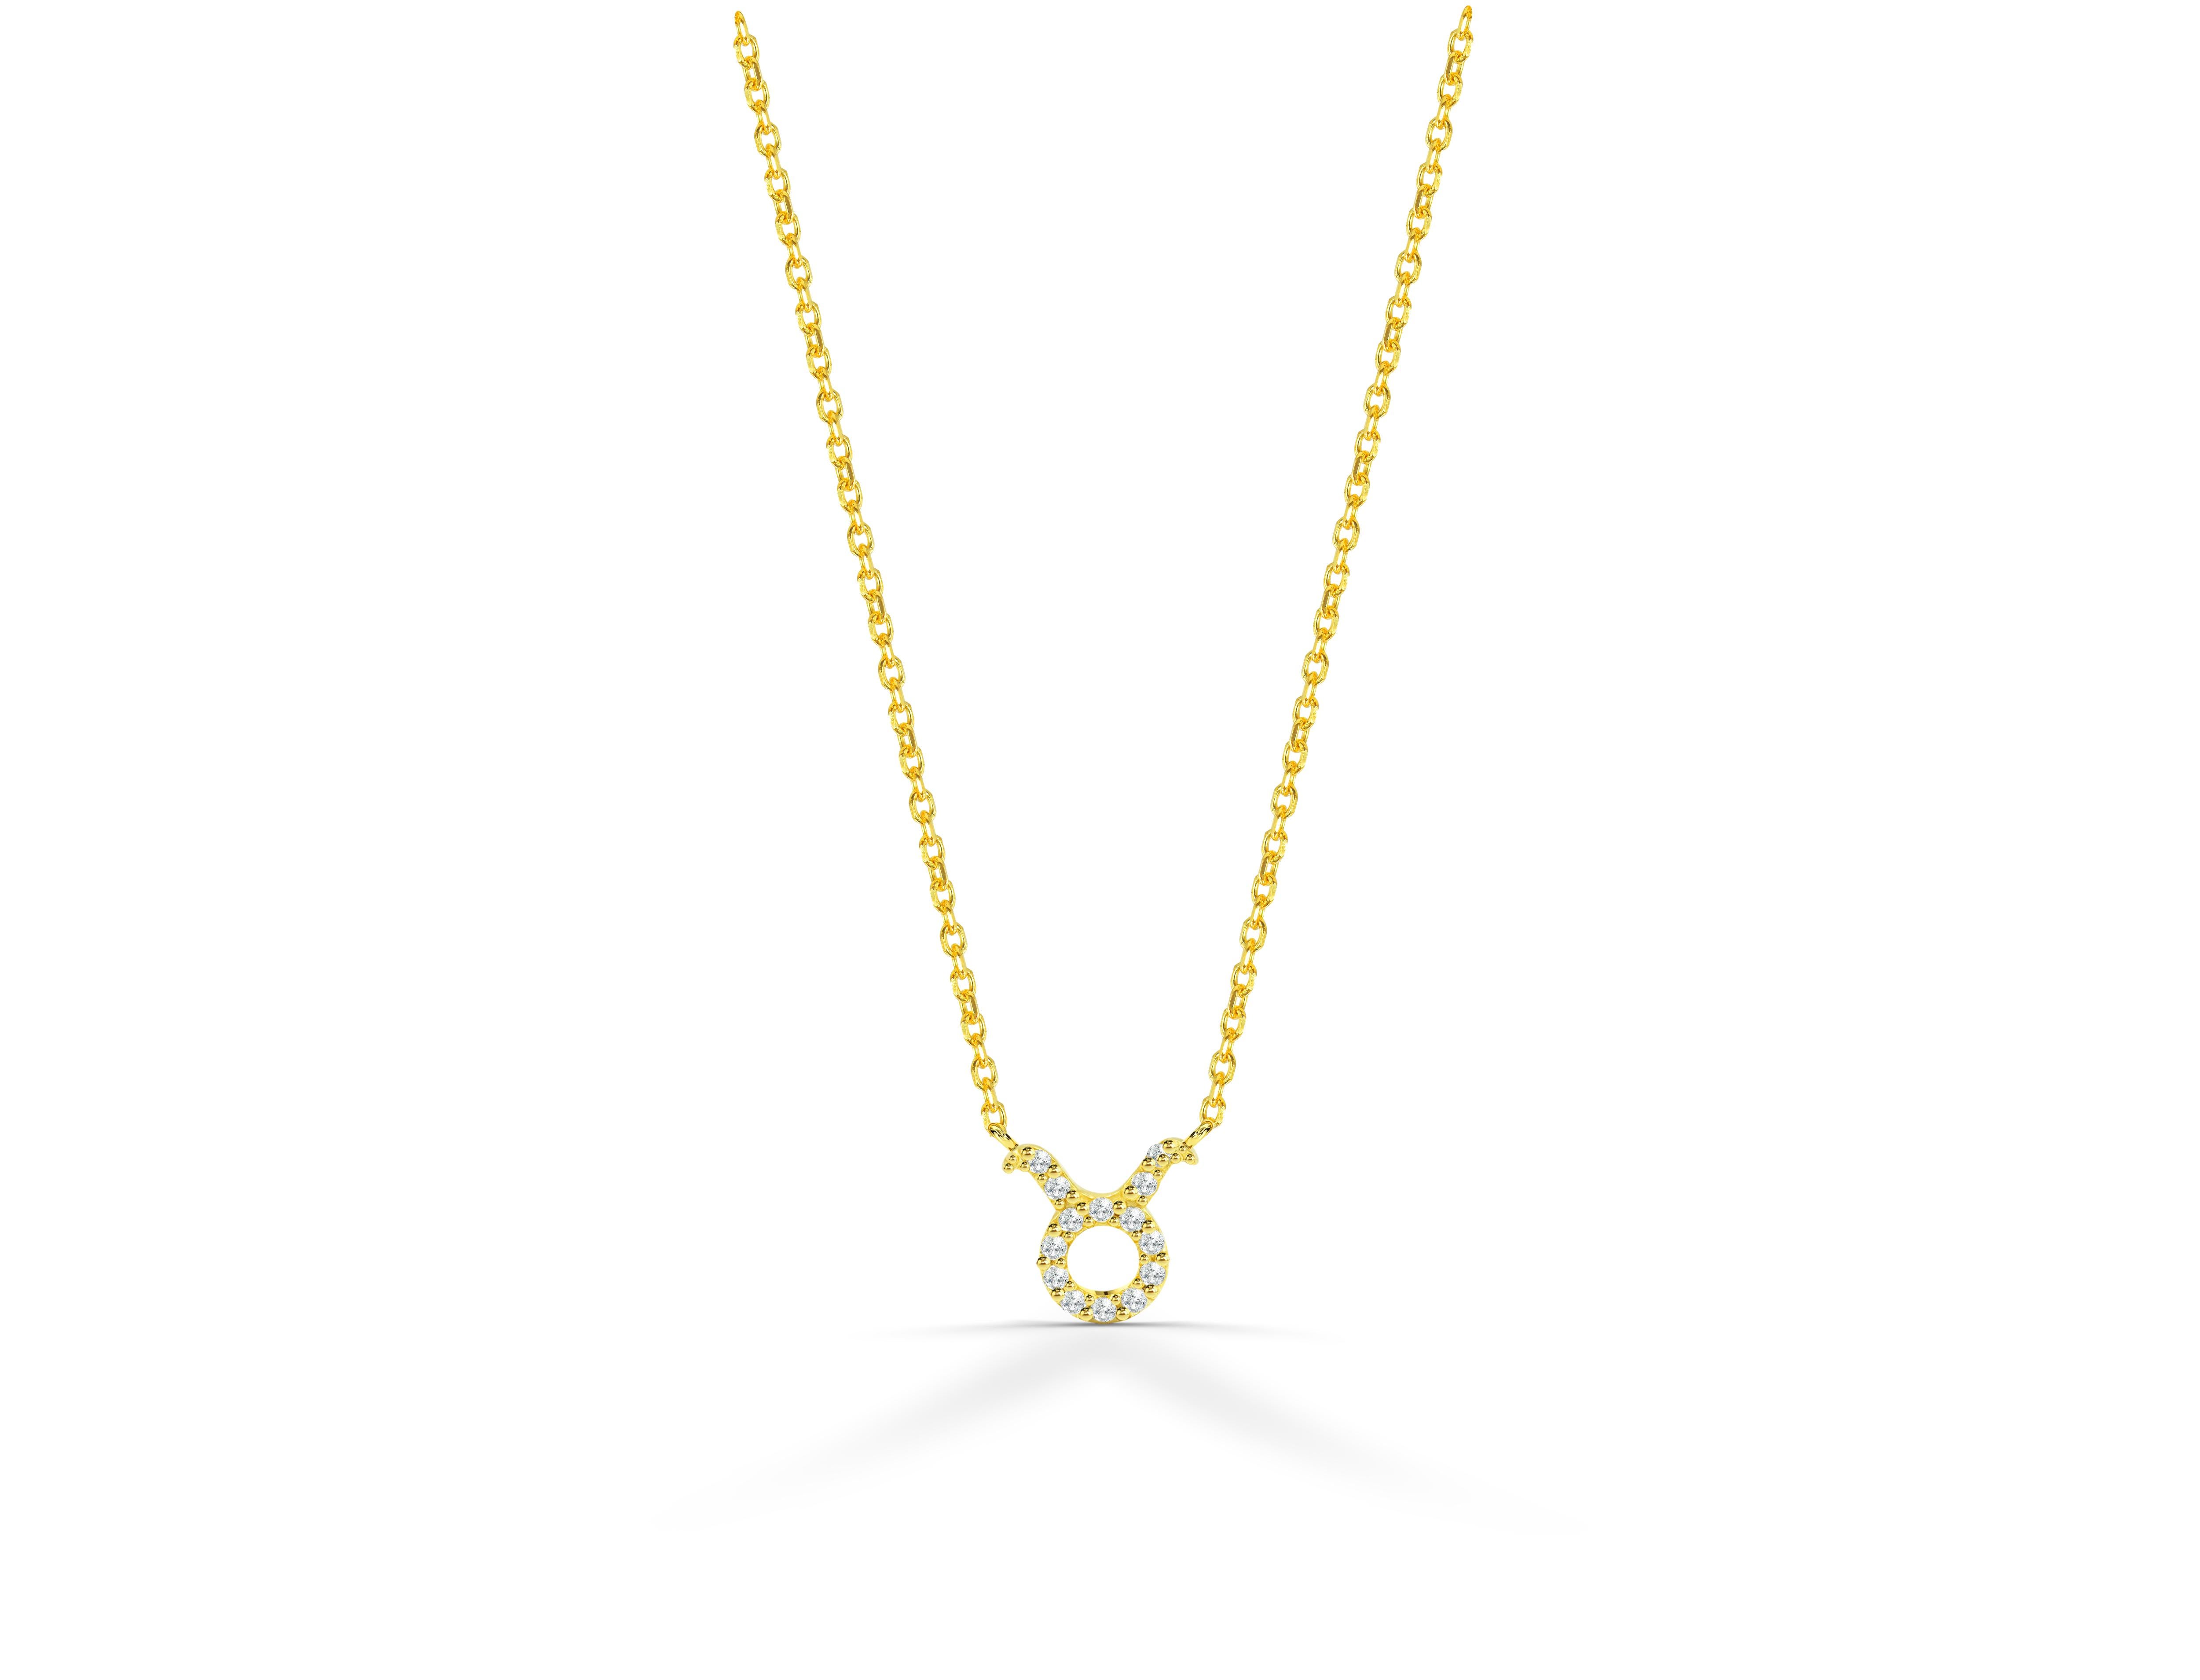 Beautiful and Sparkly Diamond Taurus Necklace is made of 14k solid gold.
Available in three colors of gold: Yellow Gold / Rose Gold / White Gold.

Natural genuine round cut diamond each diamond is hand selected by me to ensure quality and set by a